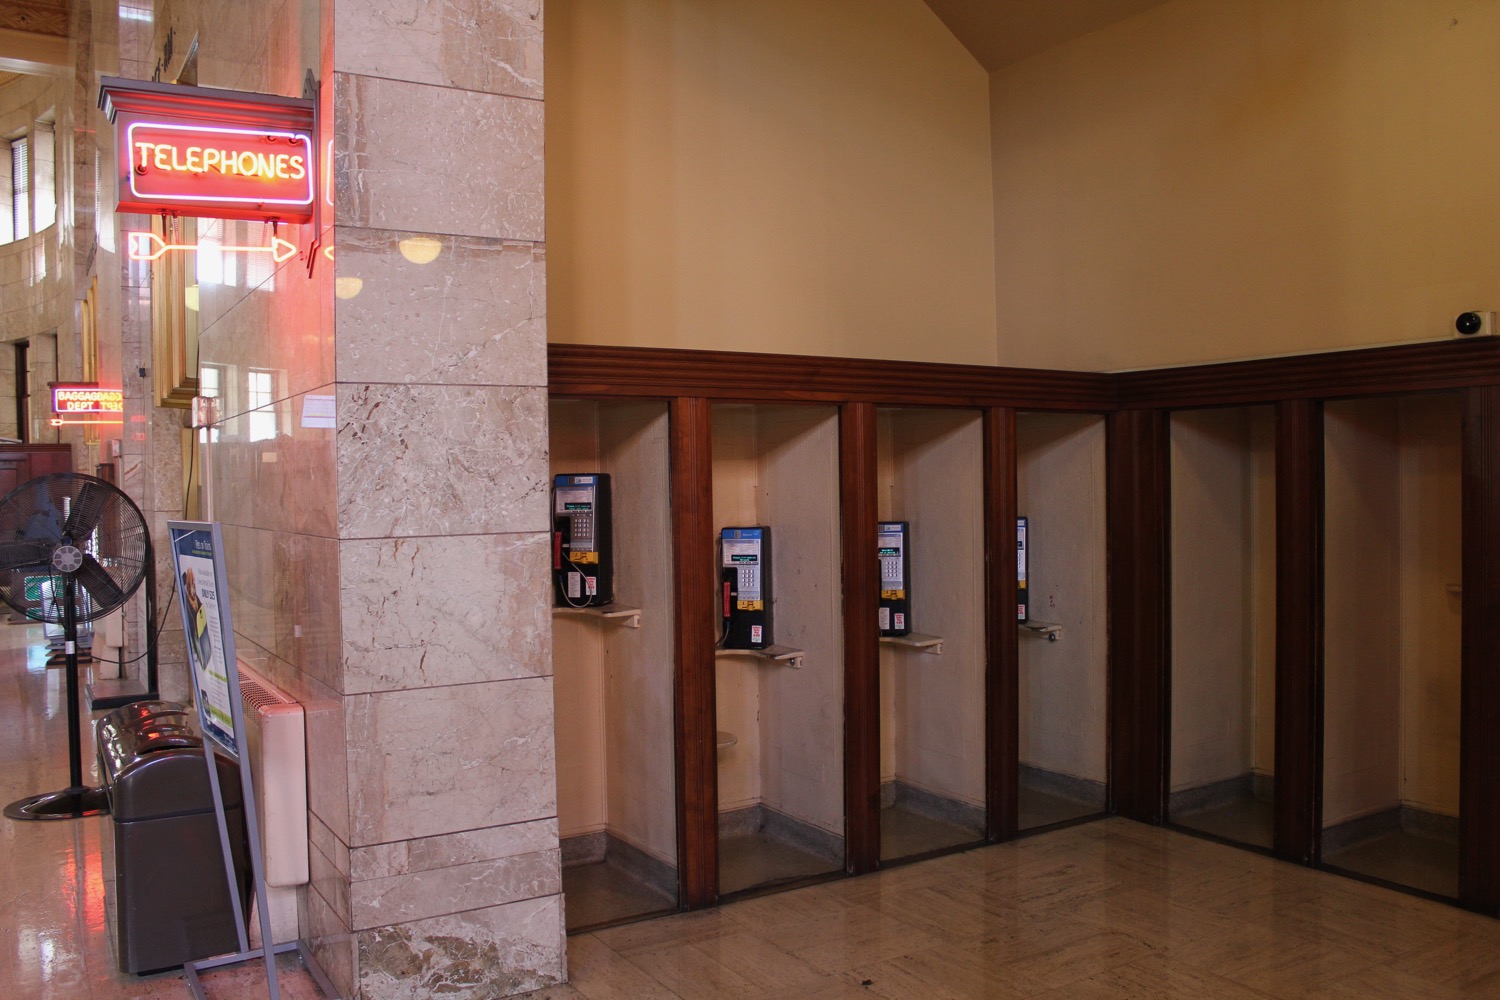 a phone booths in a building